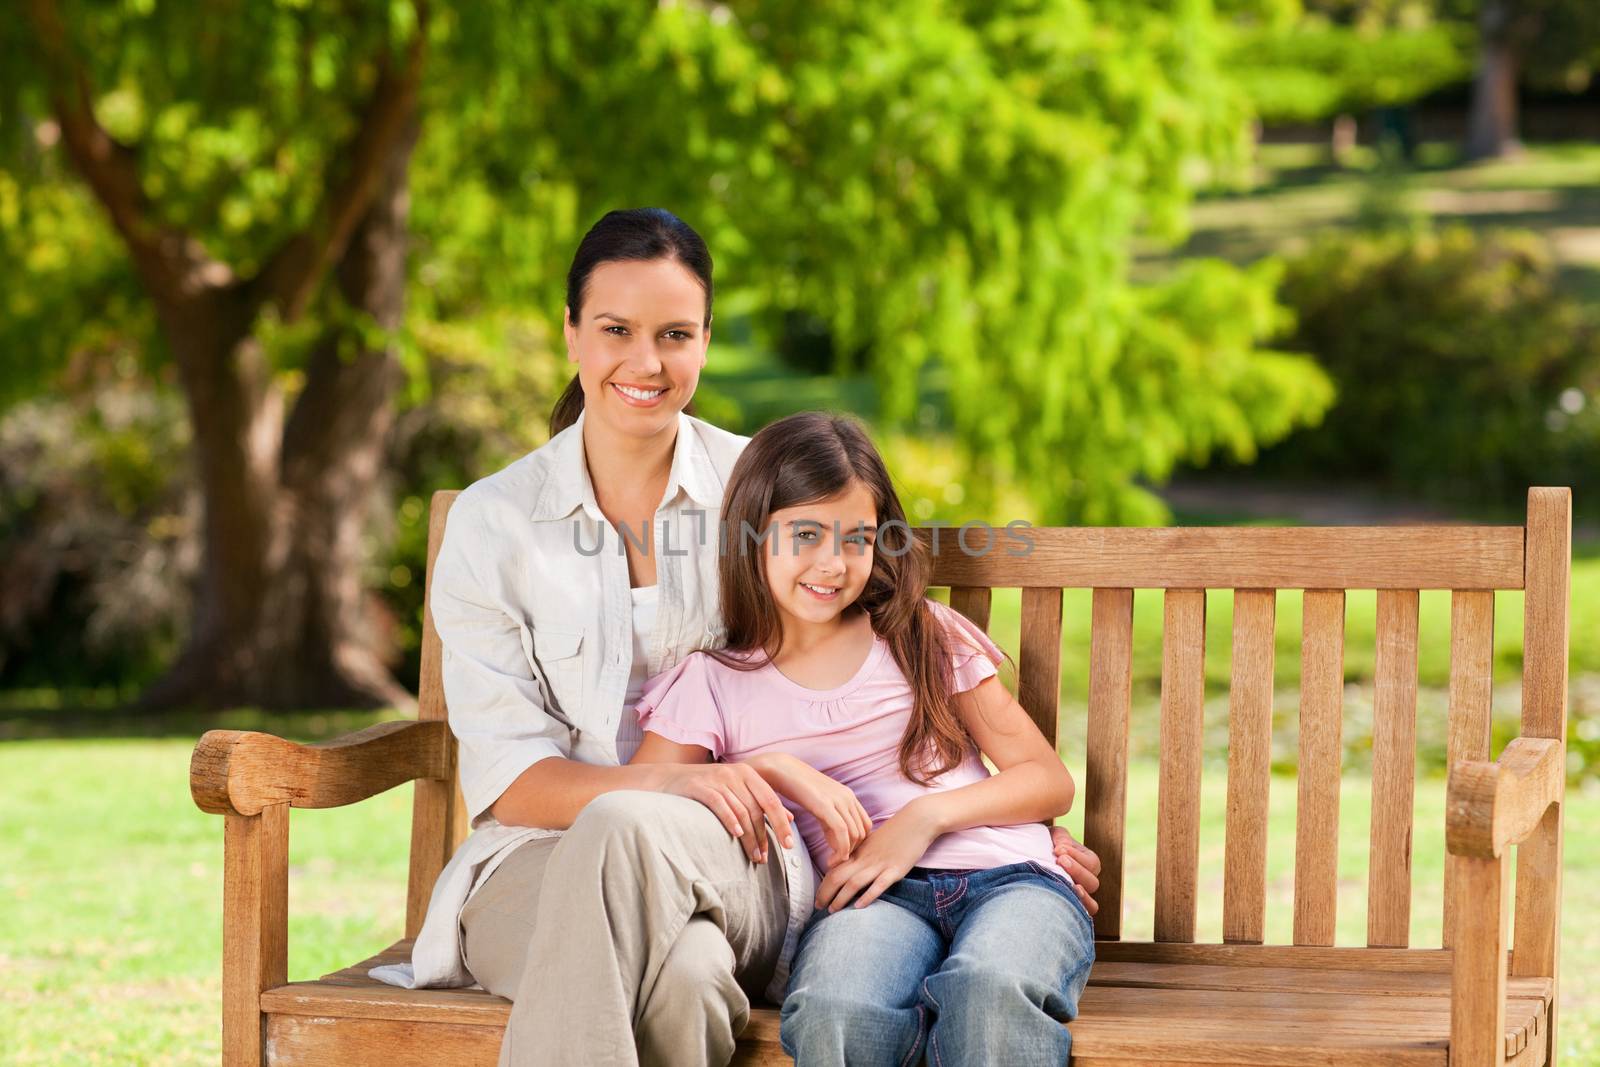 Mother and her daughter on the bench during the summer